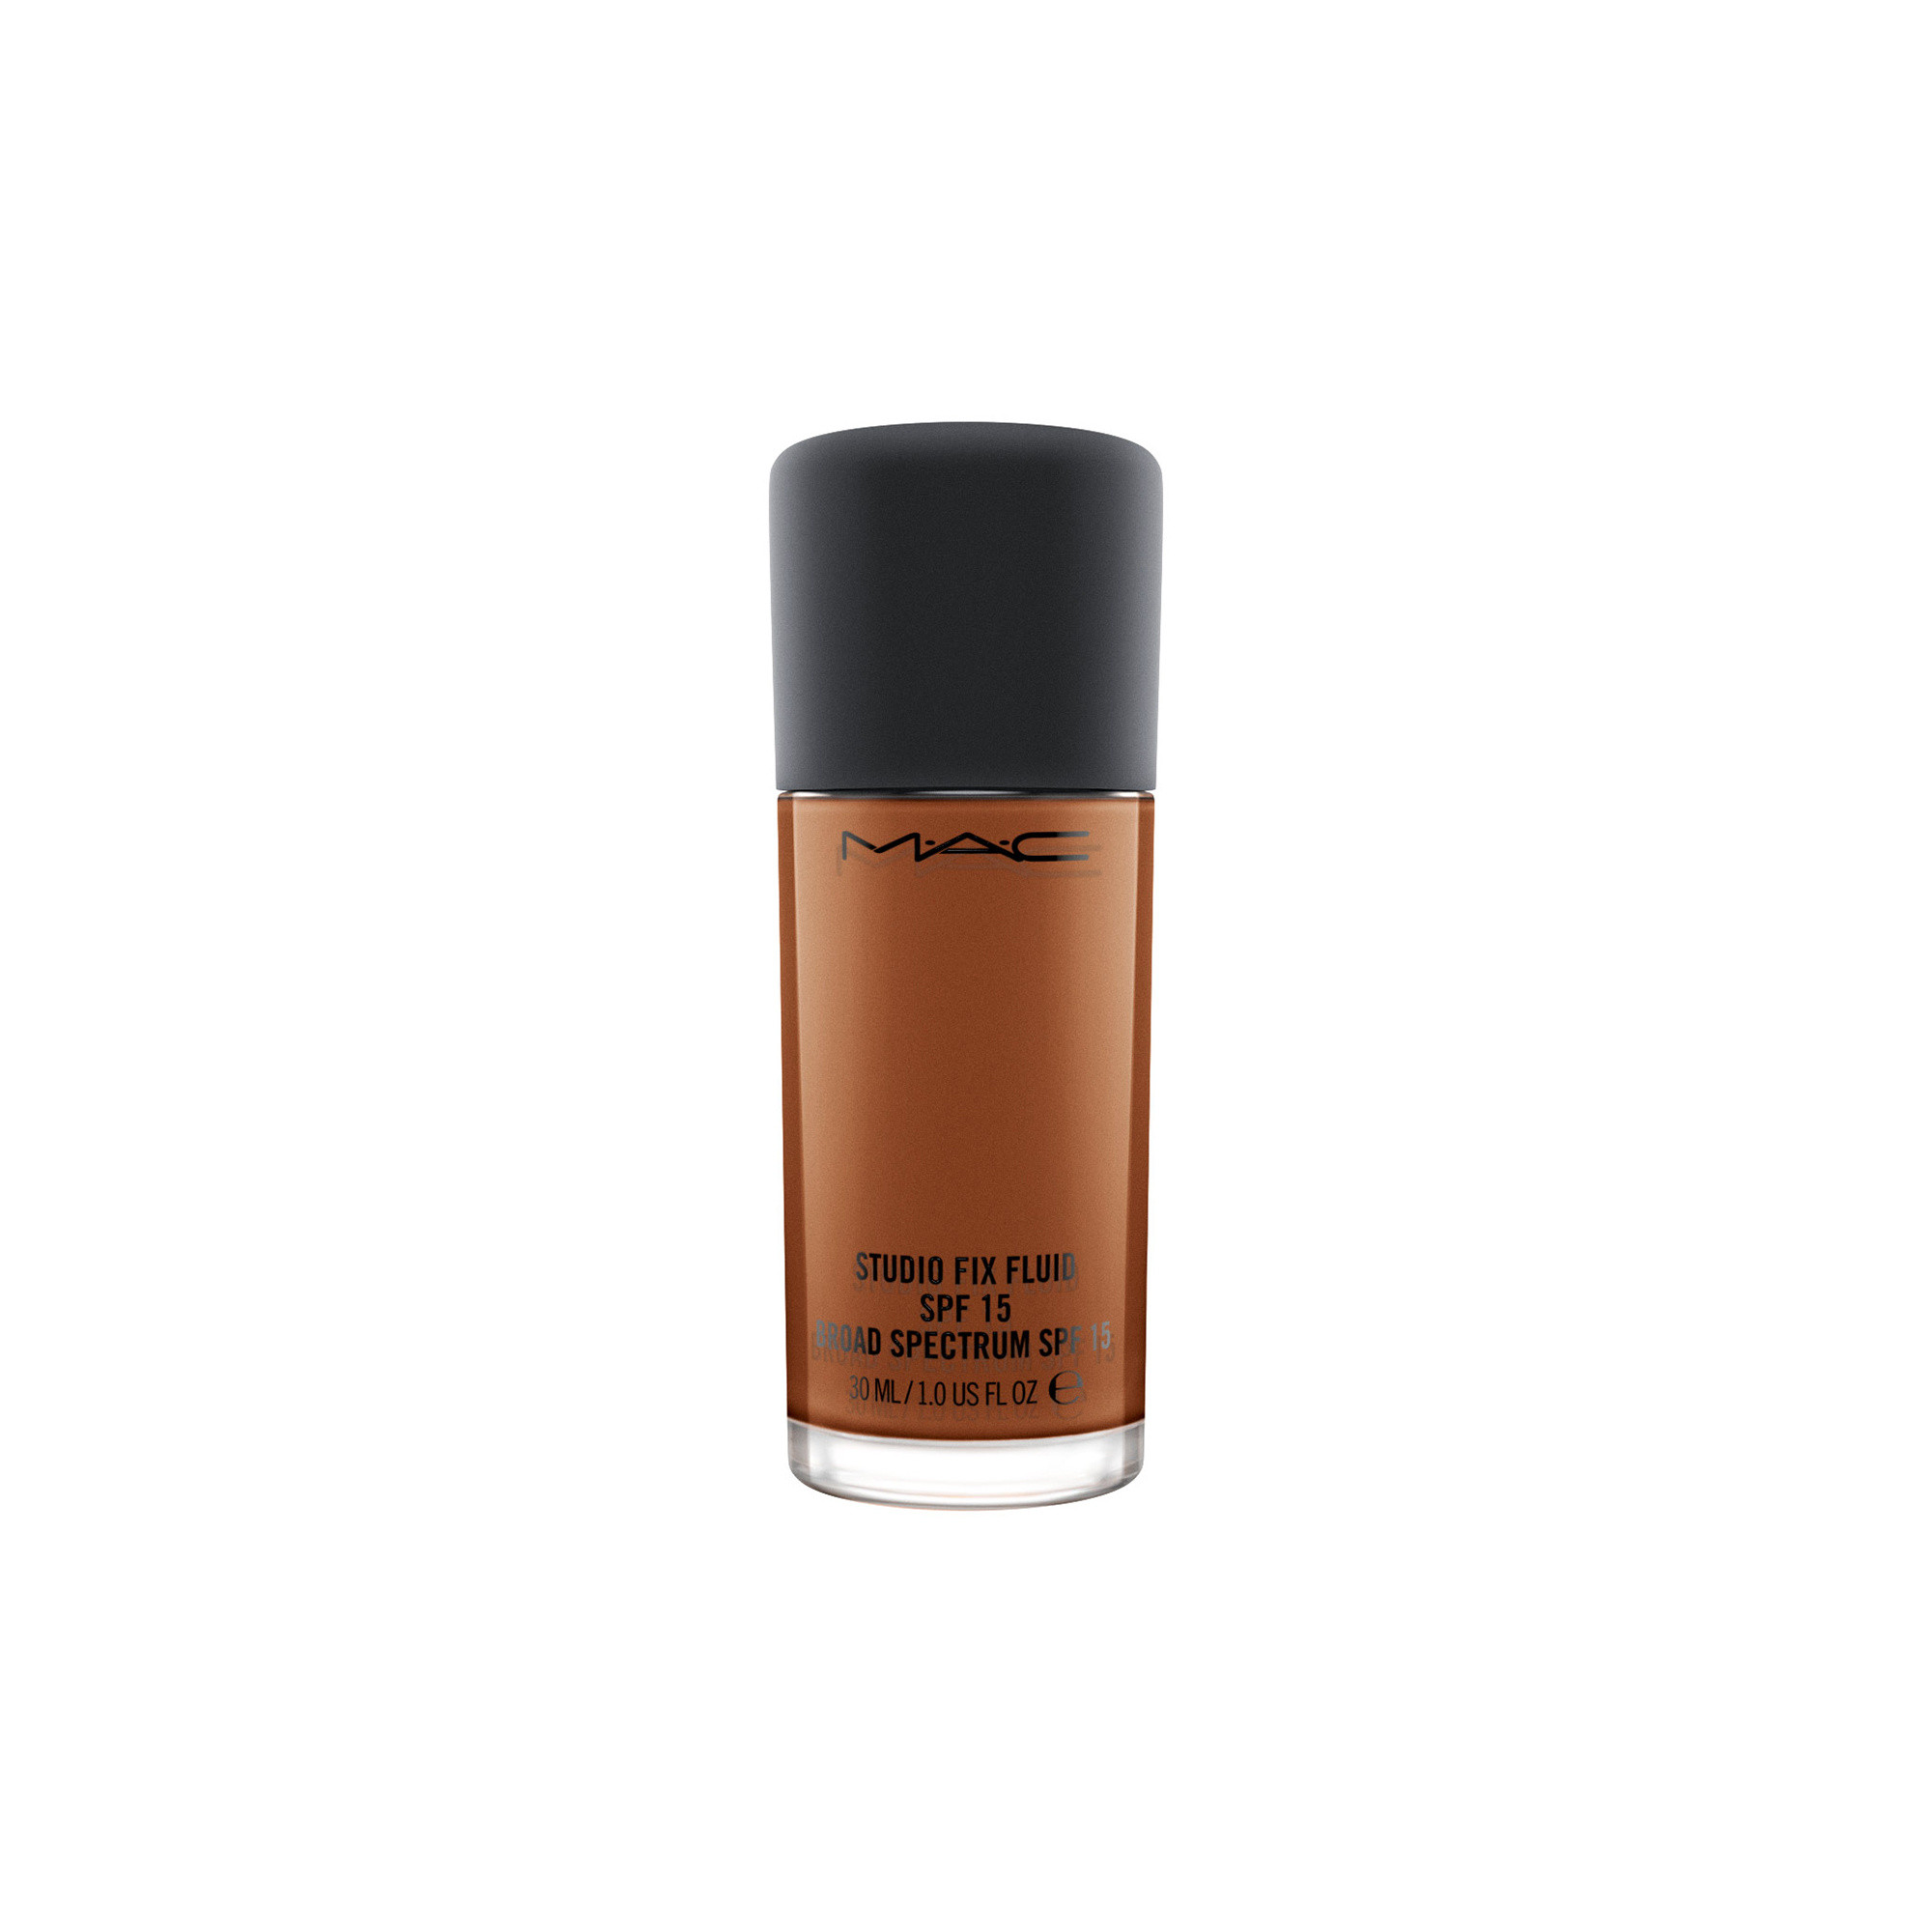 Studio Fix Fluid Foundation Spf15 - NW57, NW57, large image number 0